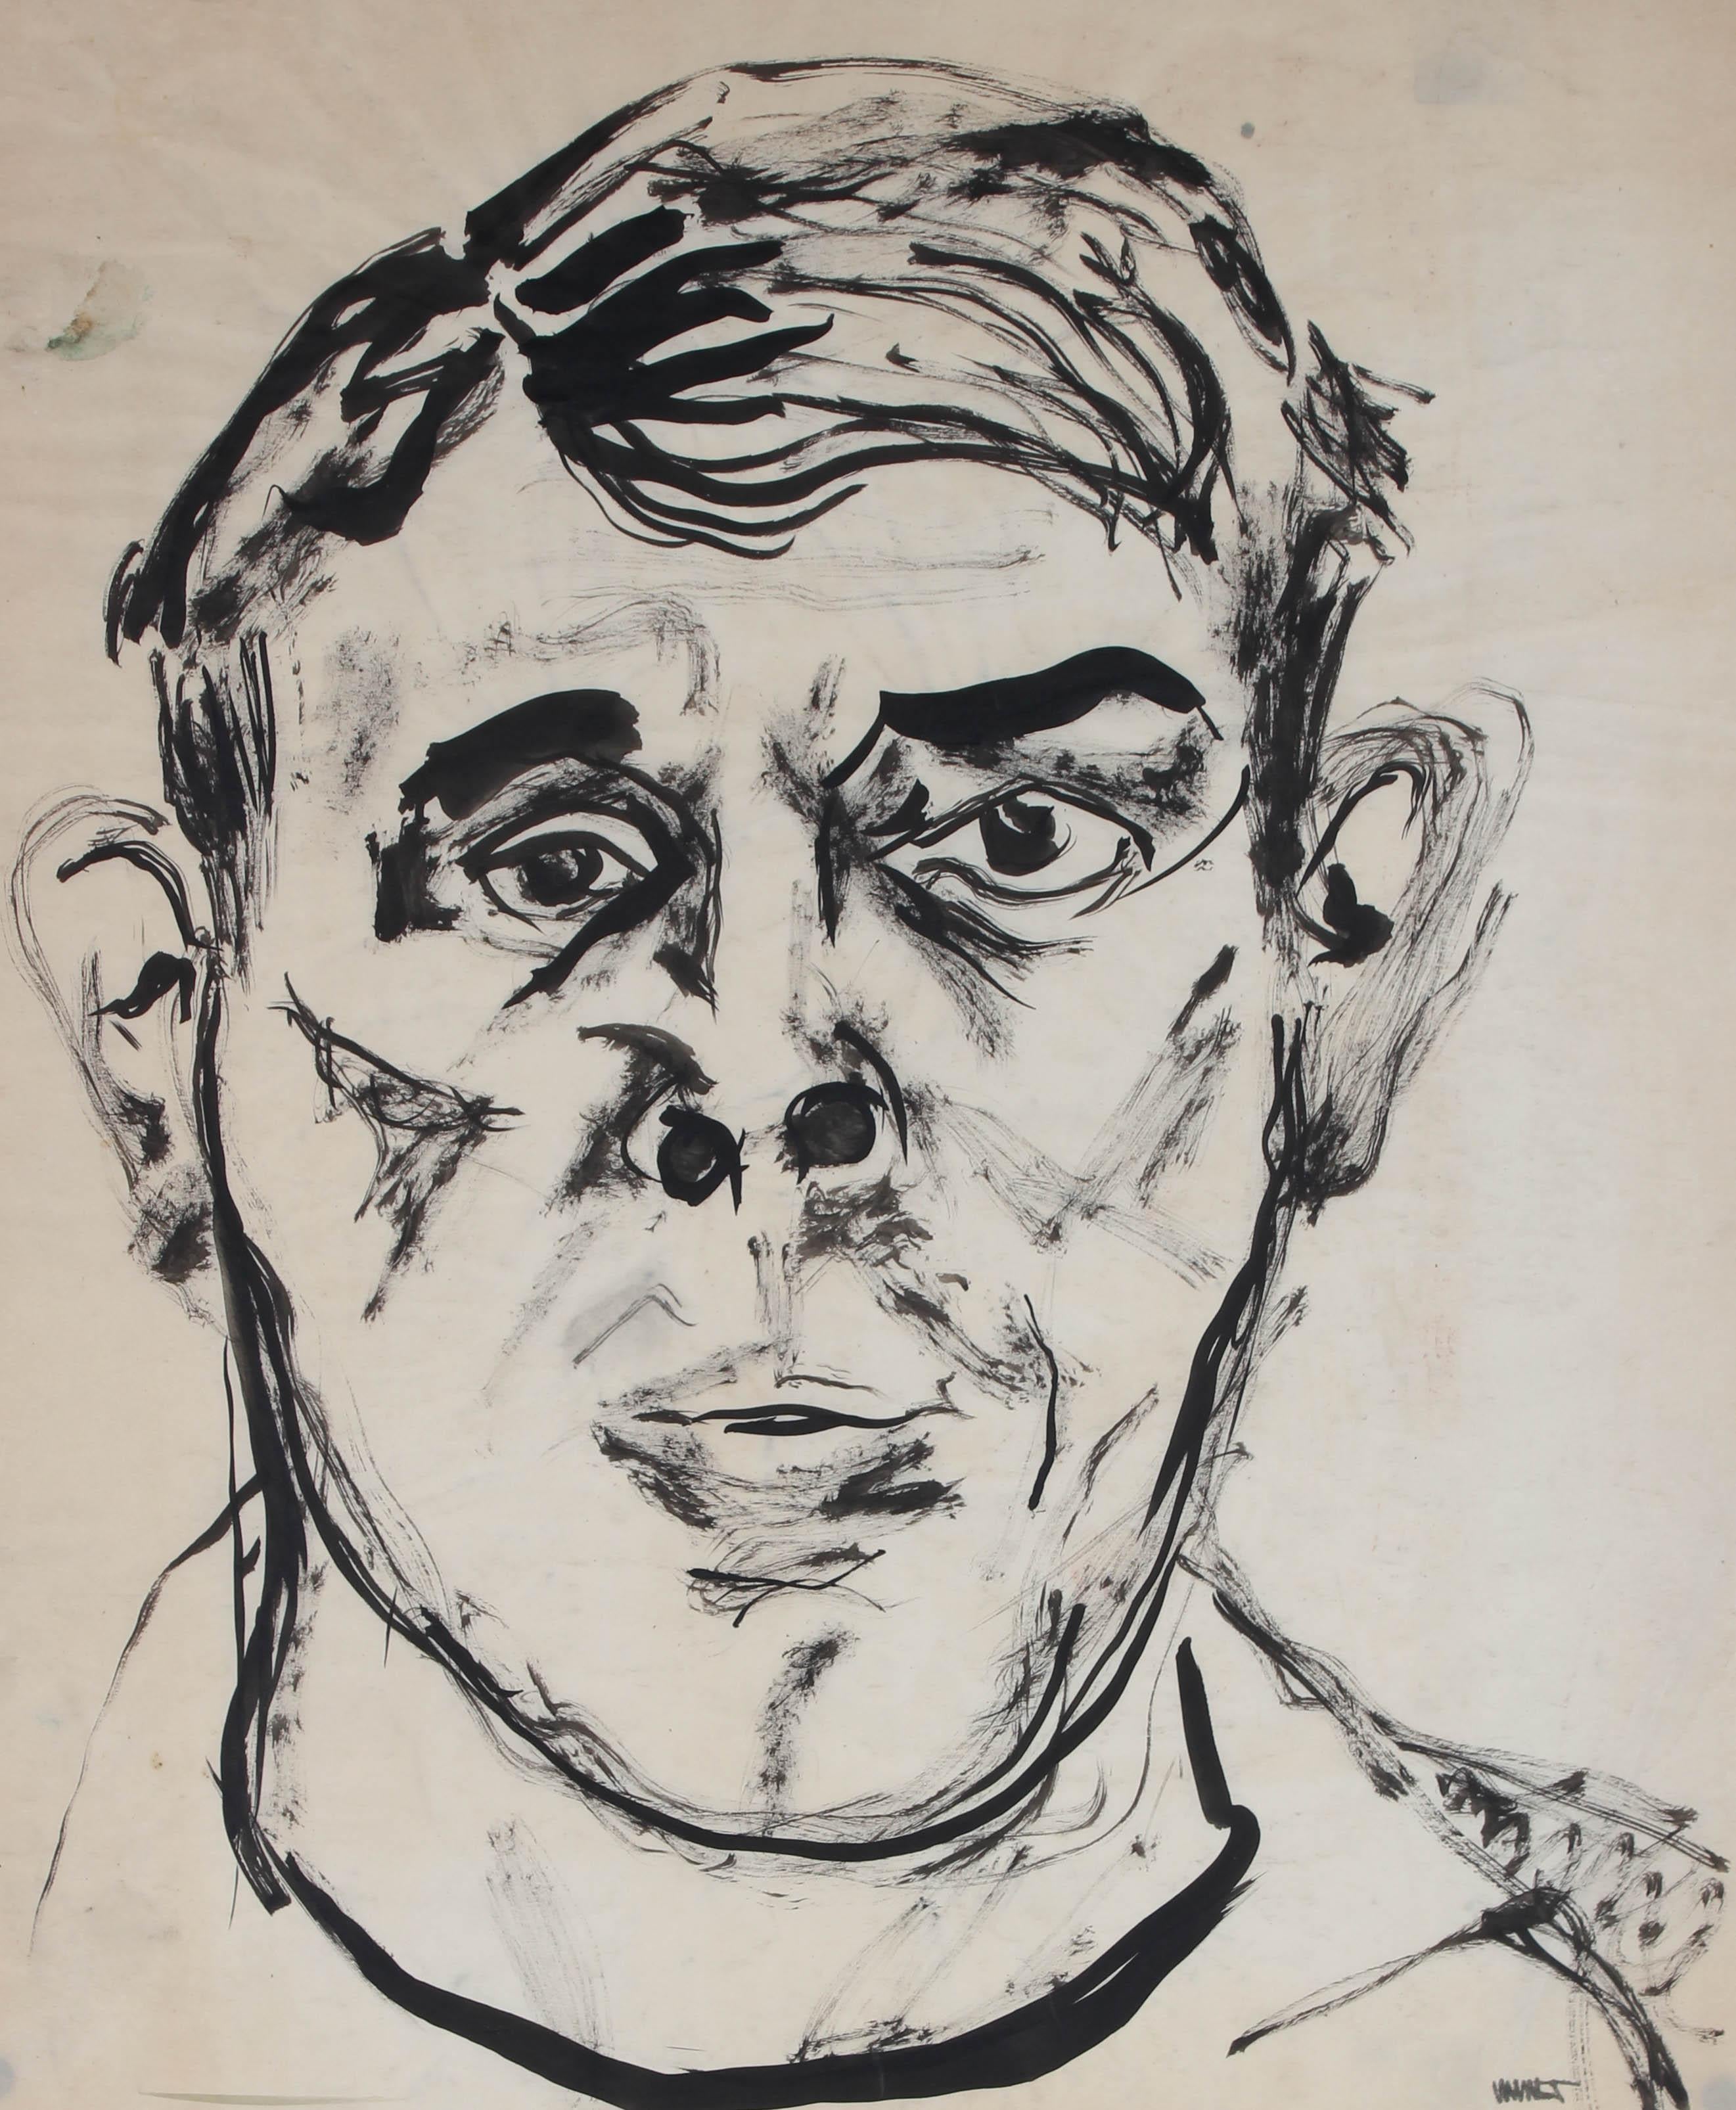 Expressionist Portrait of a Man, Ink Drawing, Mid 20th Century - Art by Malcolm McClain